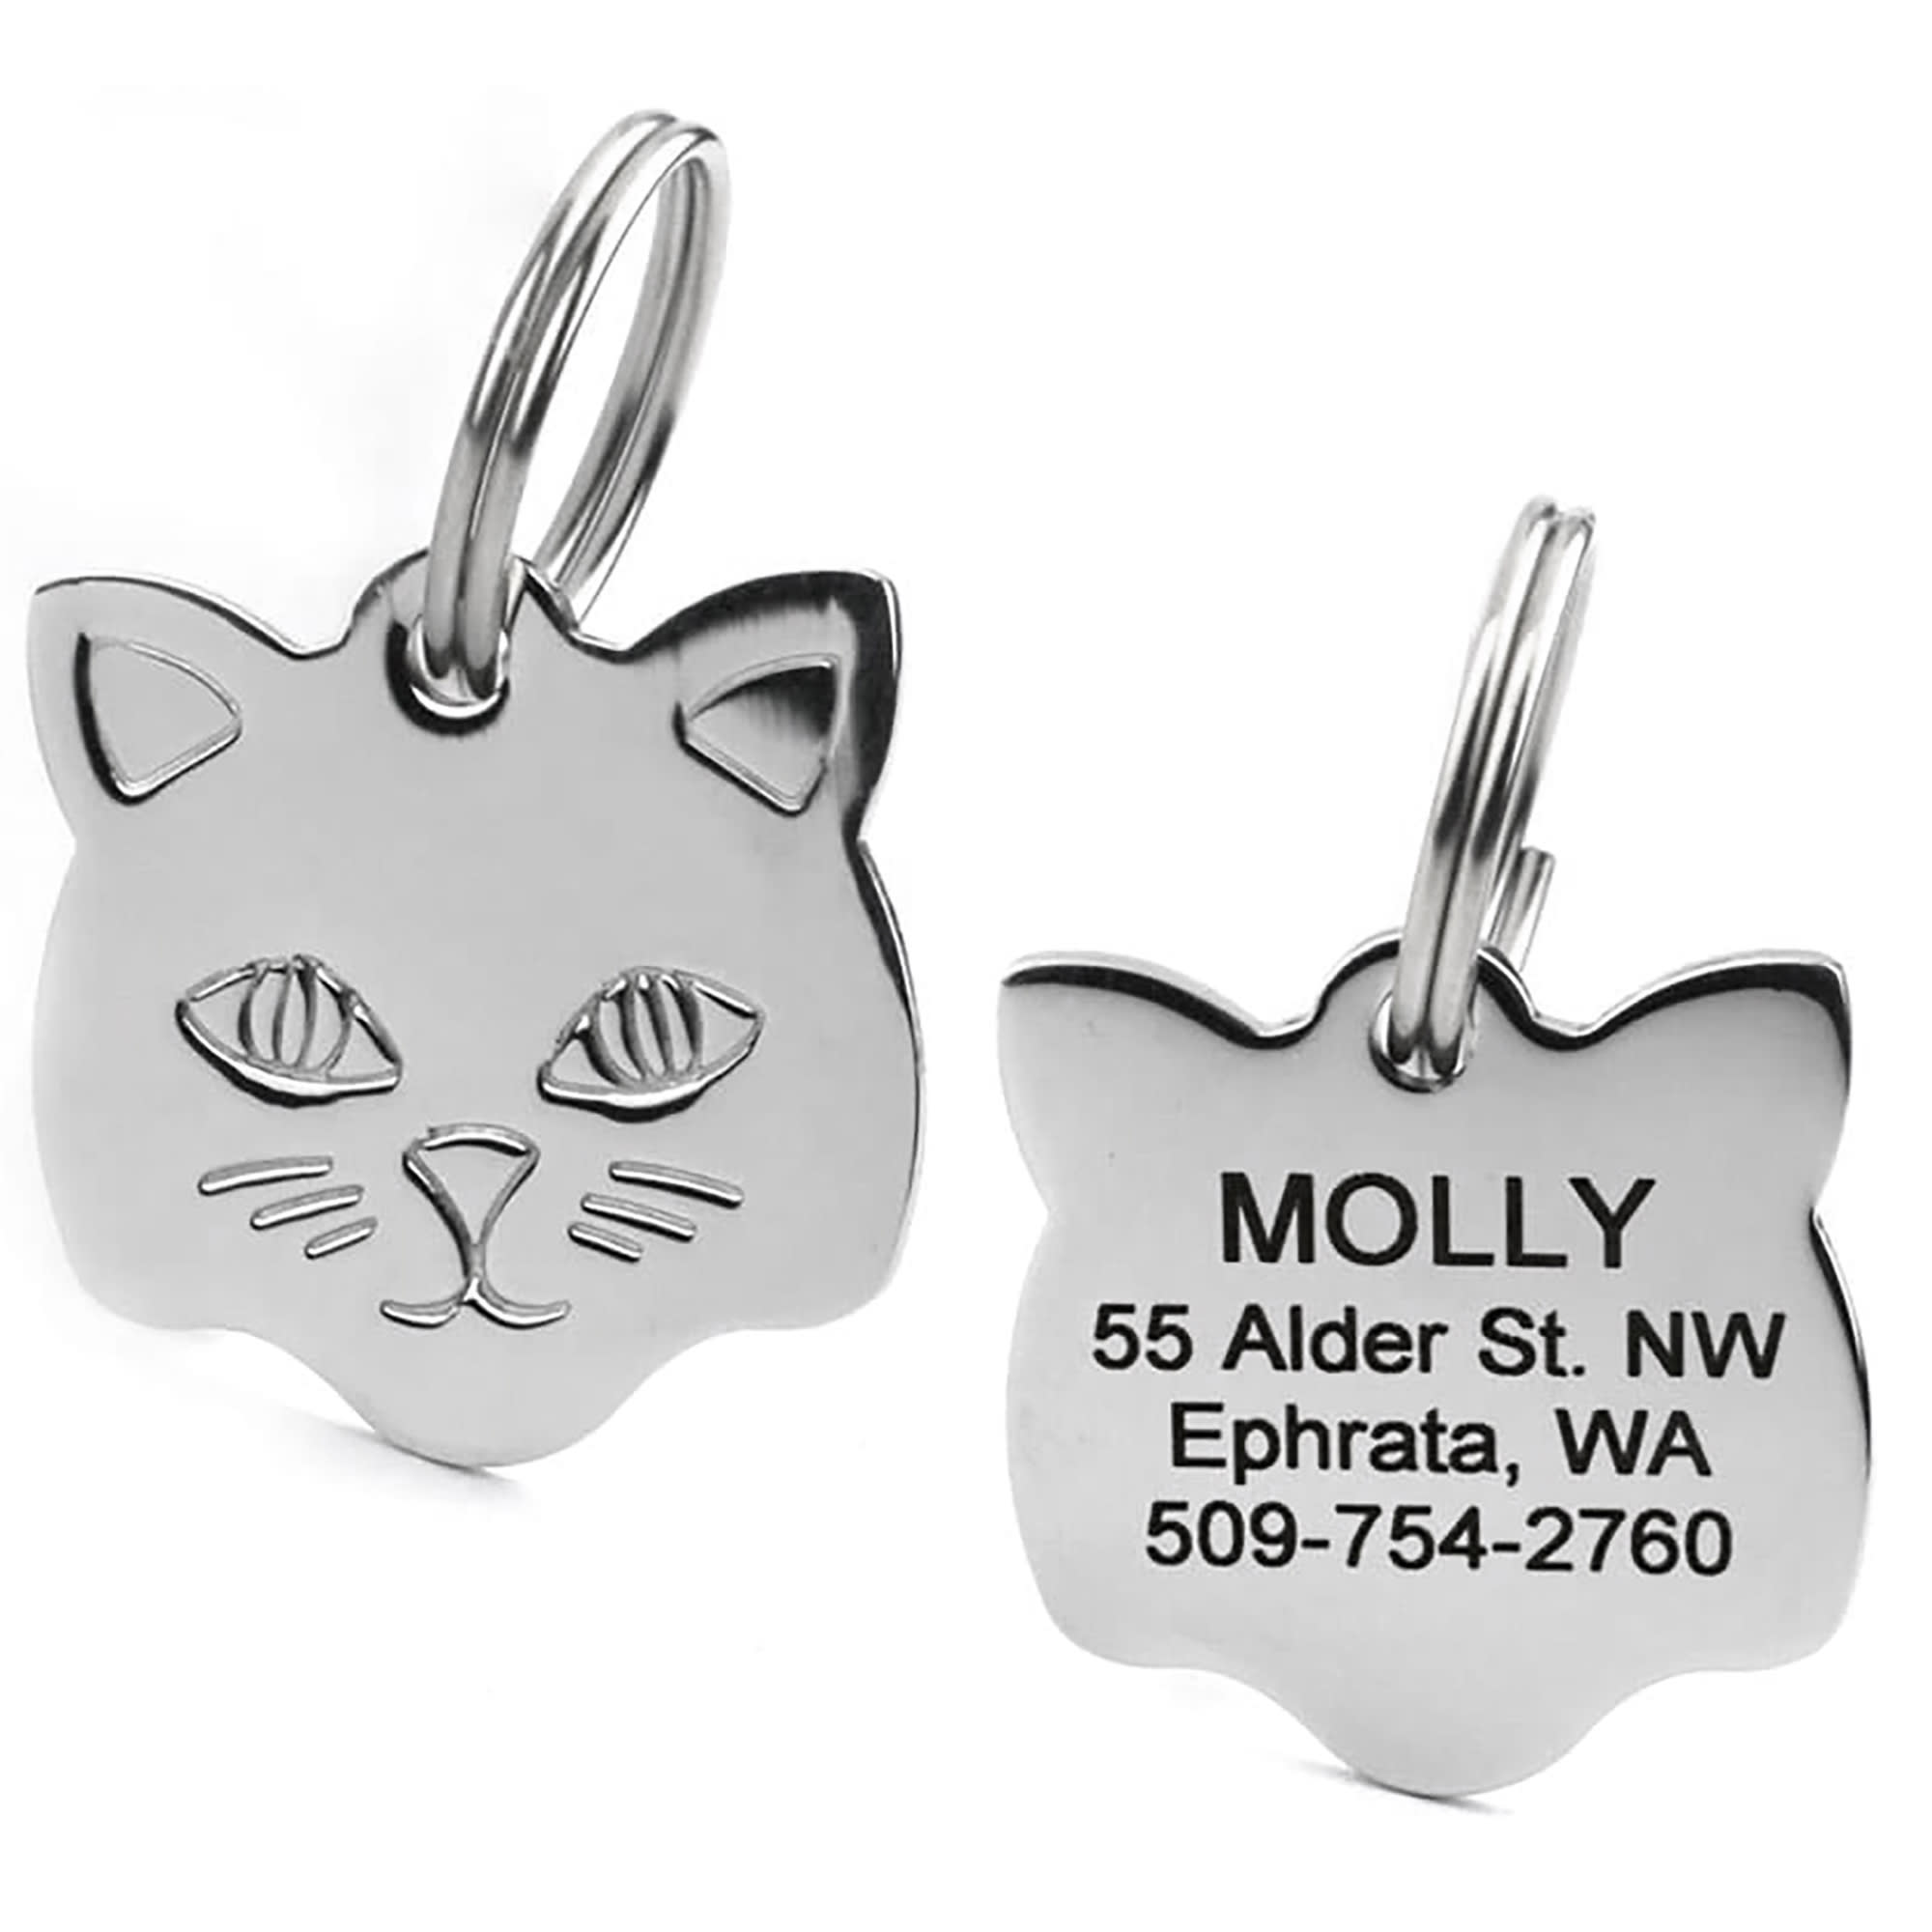 Personalized Engraving Included Paw Print Flask Stainless Steel